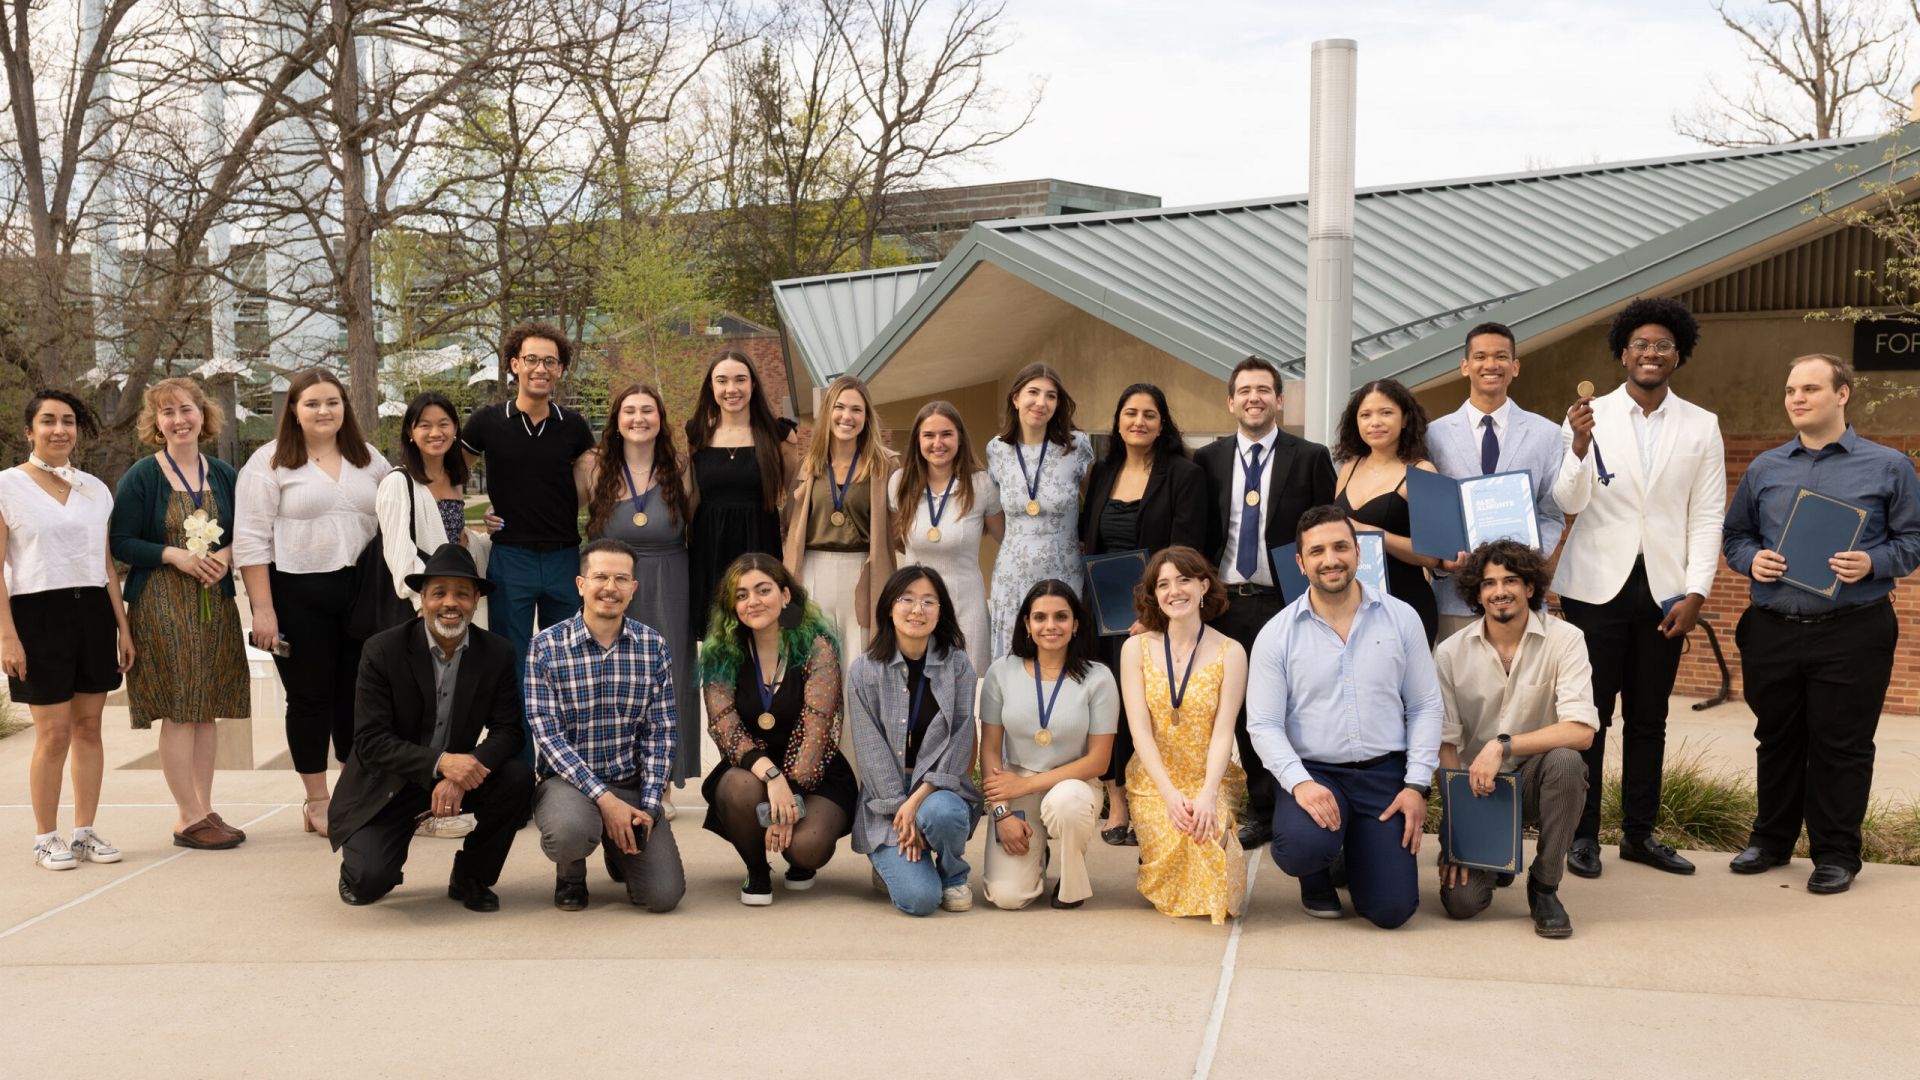 A group of two dozen student award winners and Dean Stephen Carpenter arrayed in two lines – one standing and one kneeling – with Penn State's Forum and Stuckeman Family Building in the background.